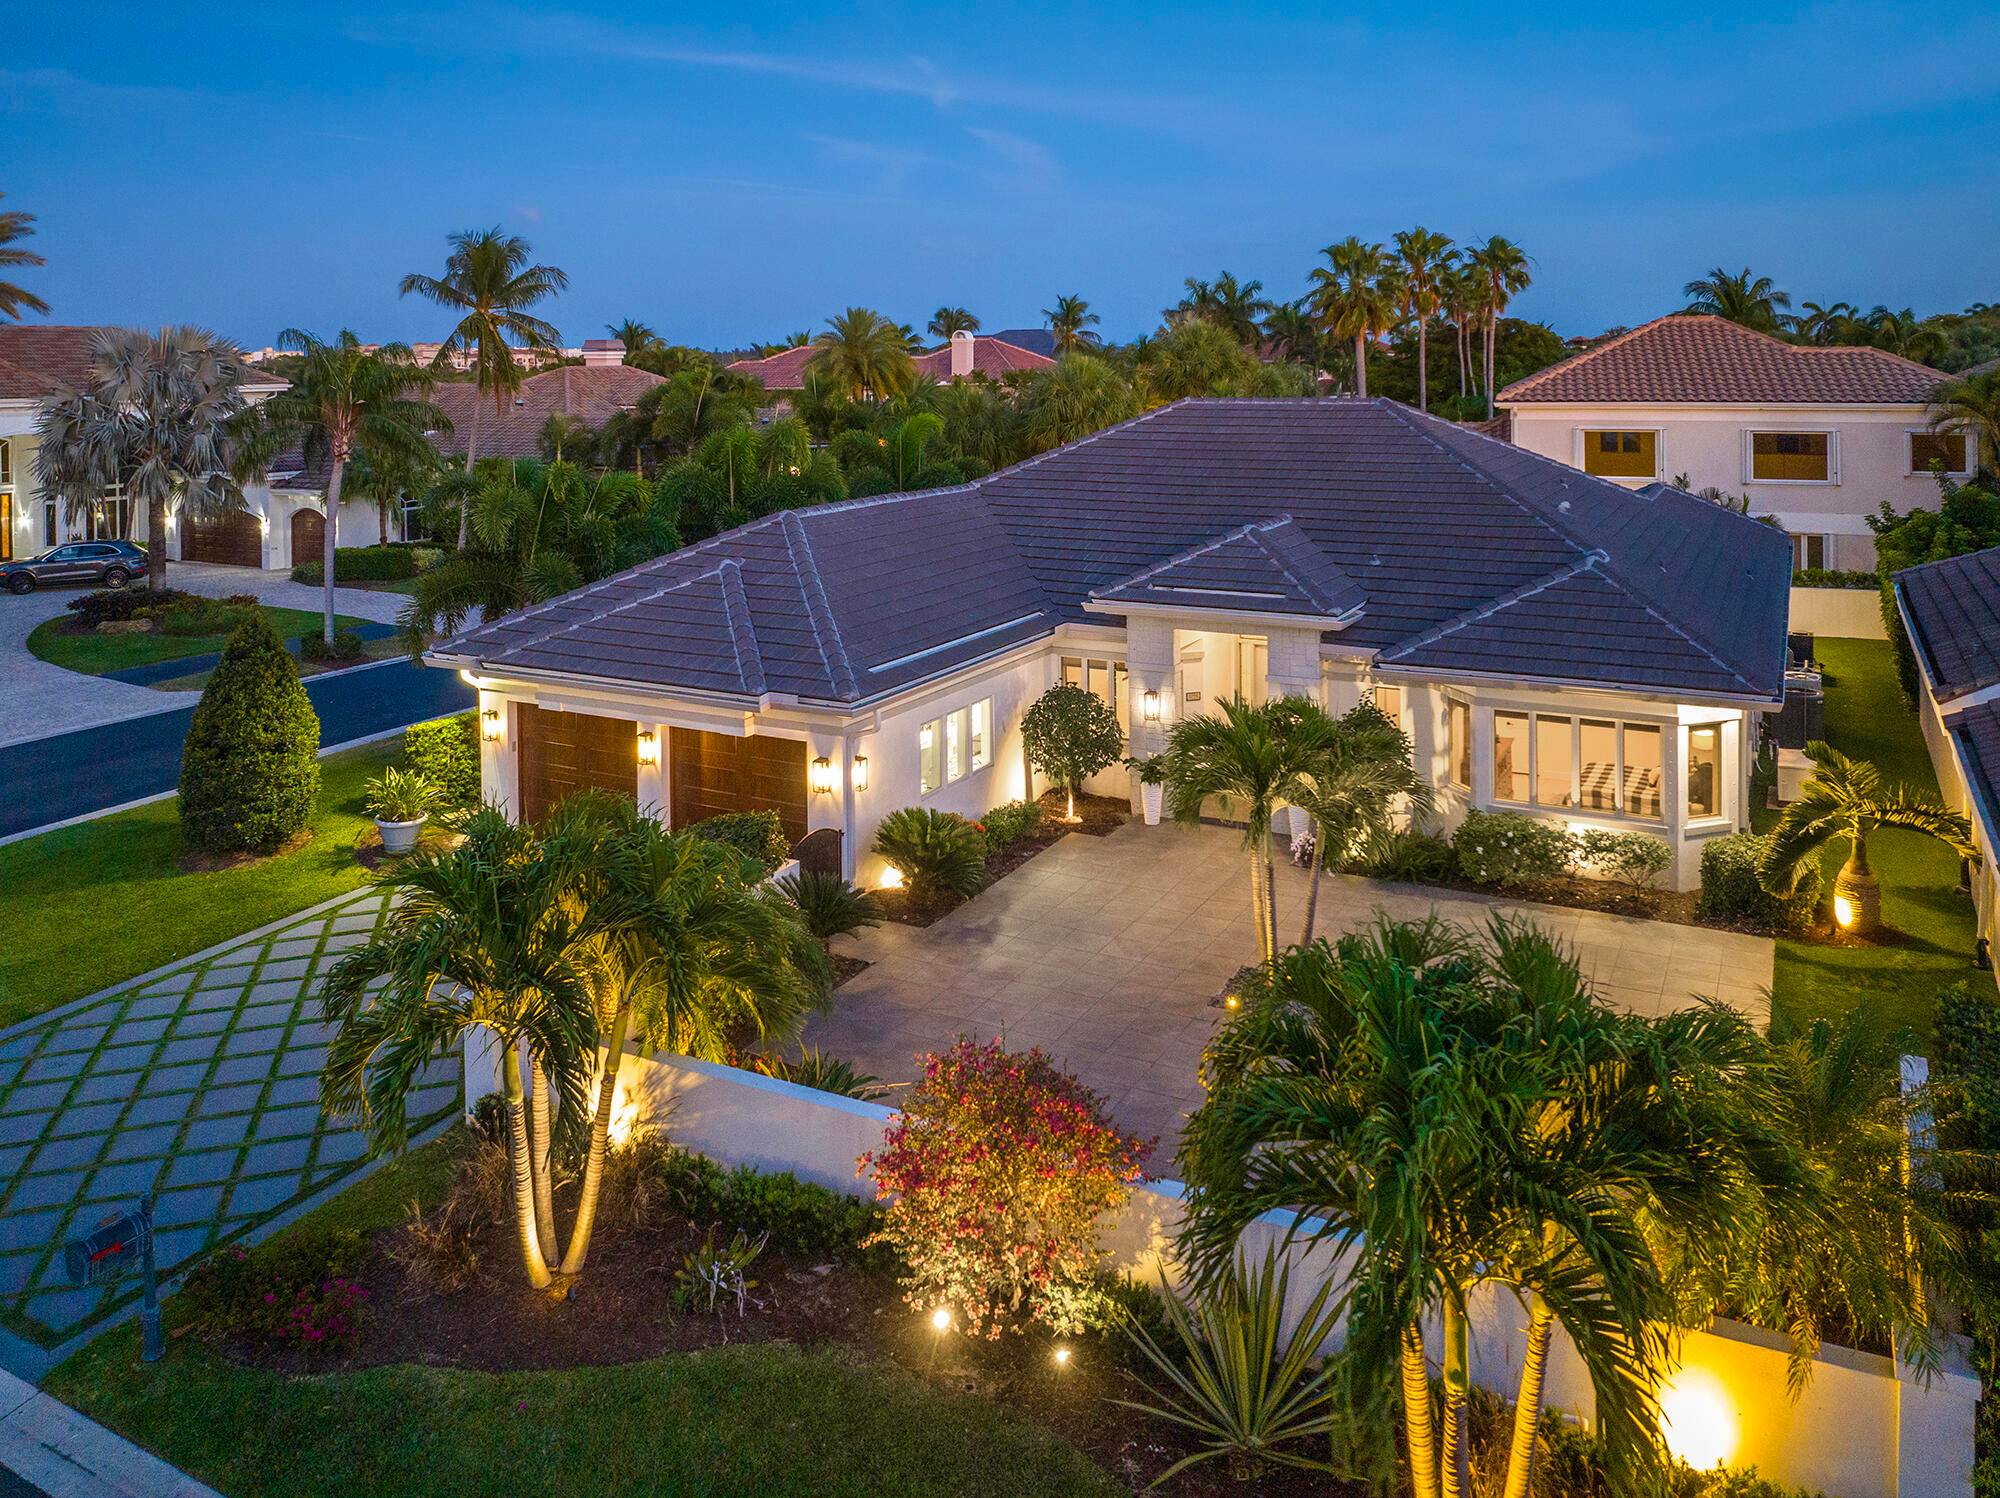 Immerse yourself in Luxury and a Lavish lifestyle within this Stunning, Fully renovated residence situated in the sought after Jonathan's Landing community of Casseekey Island in Jupiter, Florida.